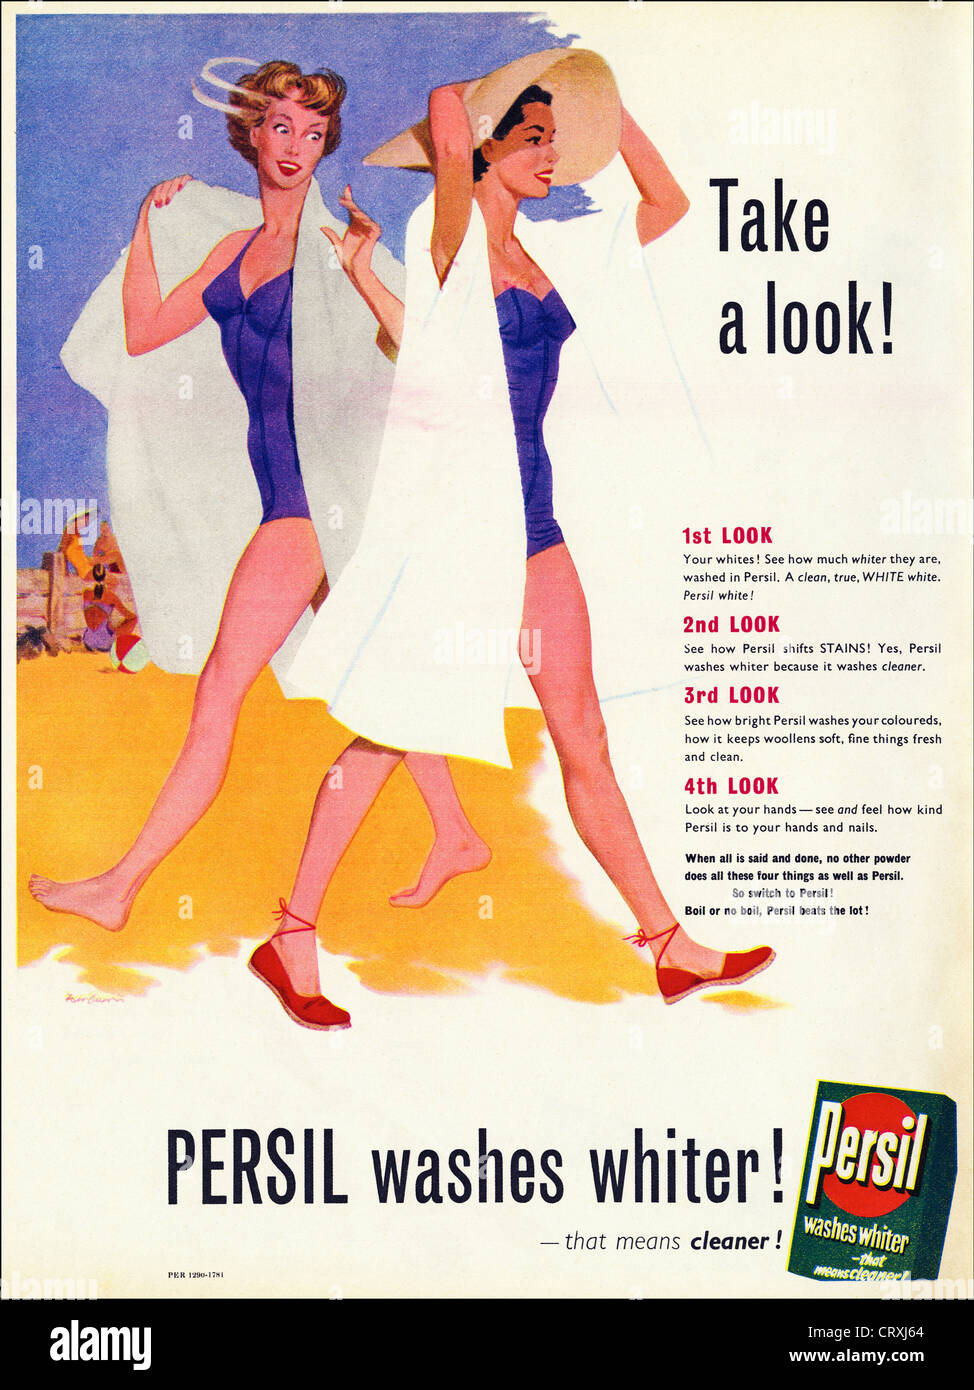 Women's Undergarments Ads Archives - Vintage Ads and Stuff